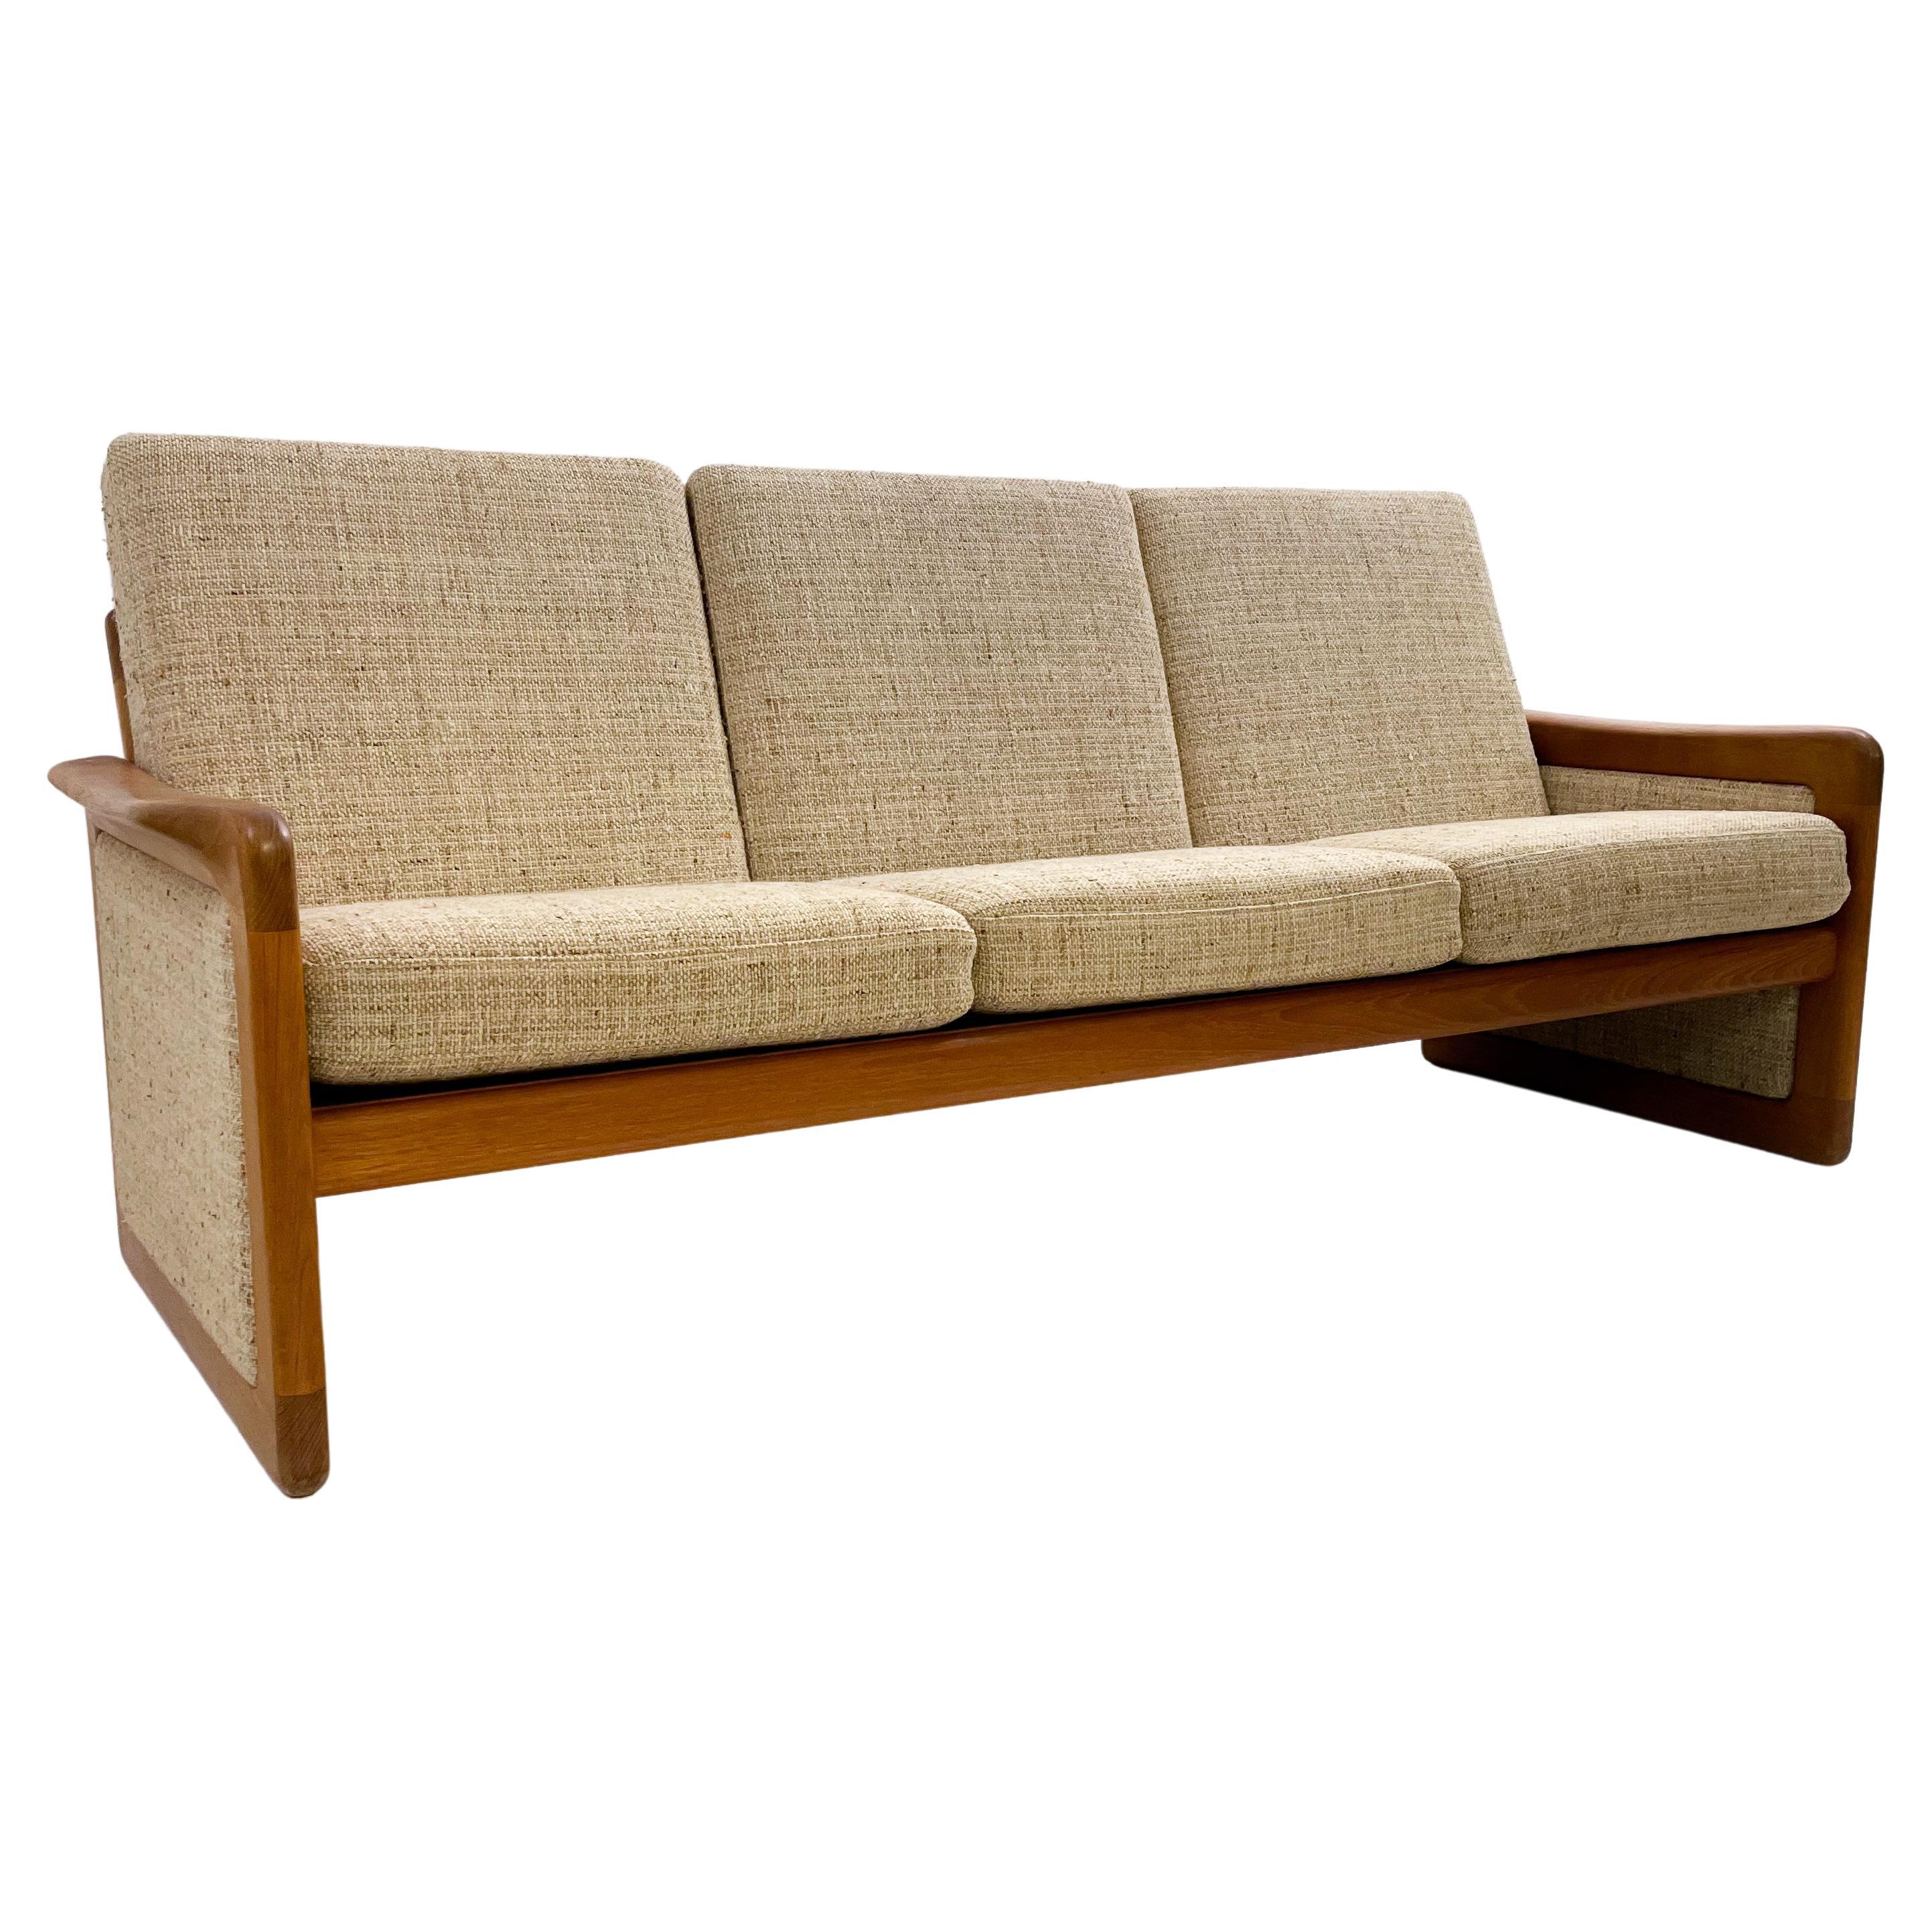 Mid-Century Teck and Beige Wool Cushions Sofa by Dyrlund, 1960s For Sale